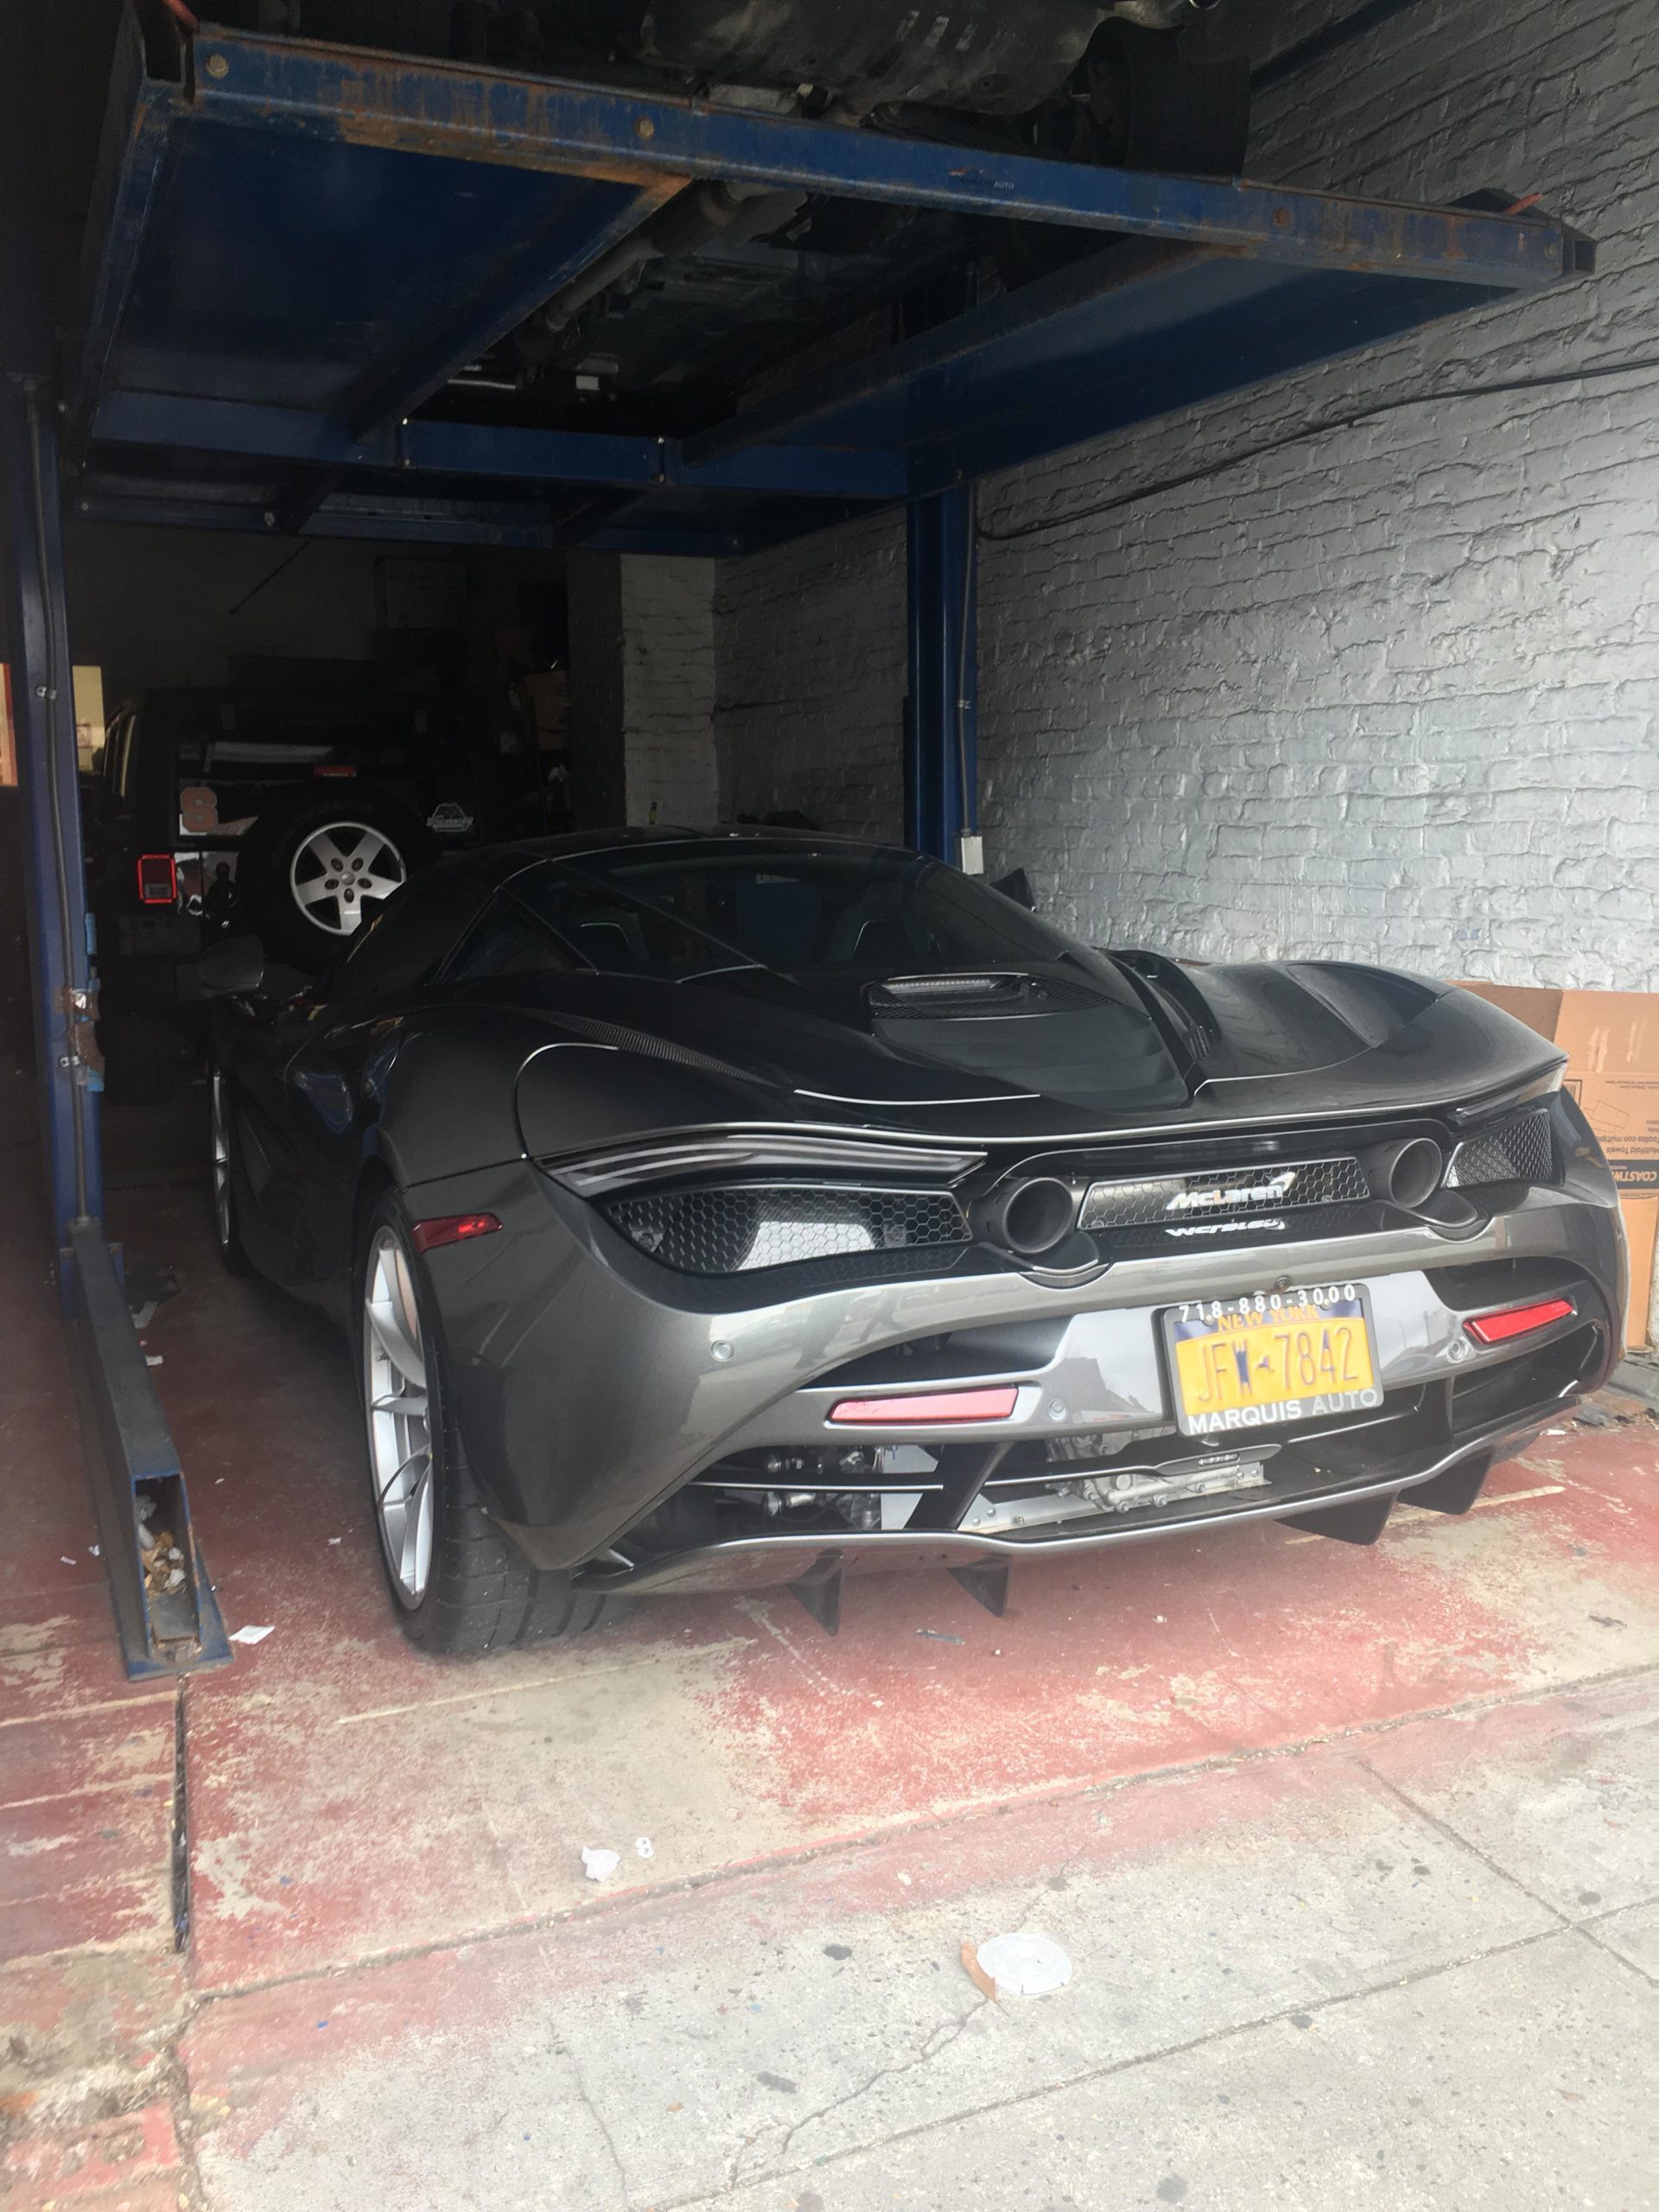 Spotted this McLaren 720S in Brooklyn, New York.